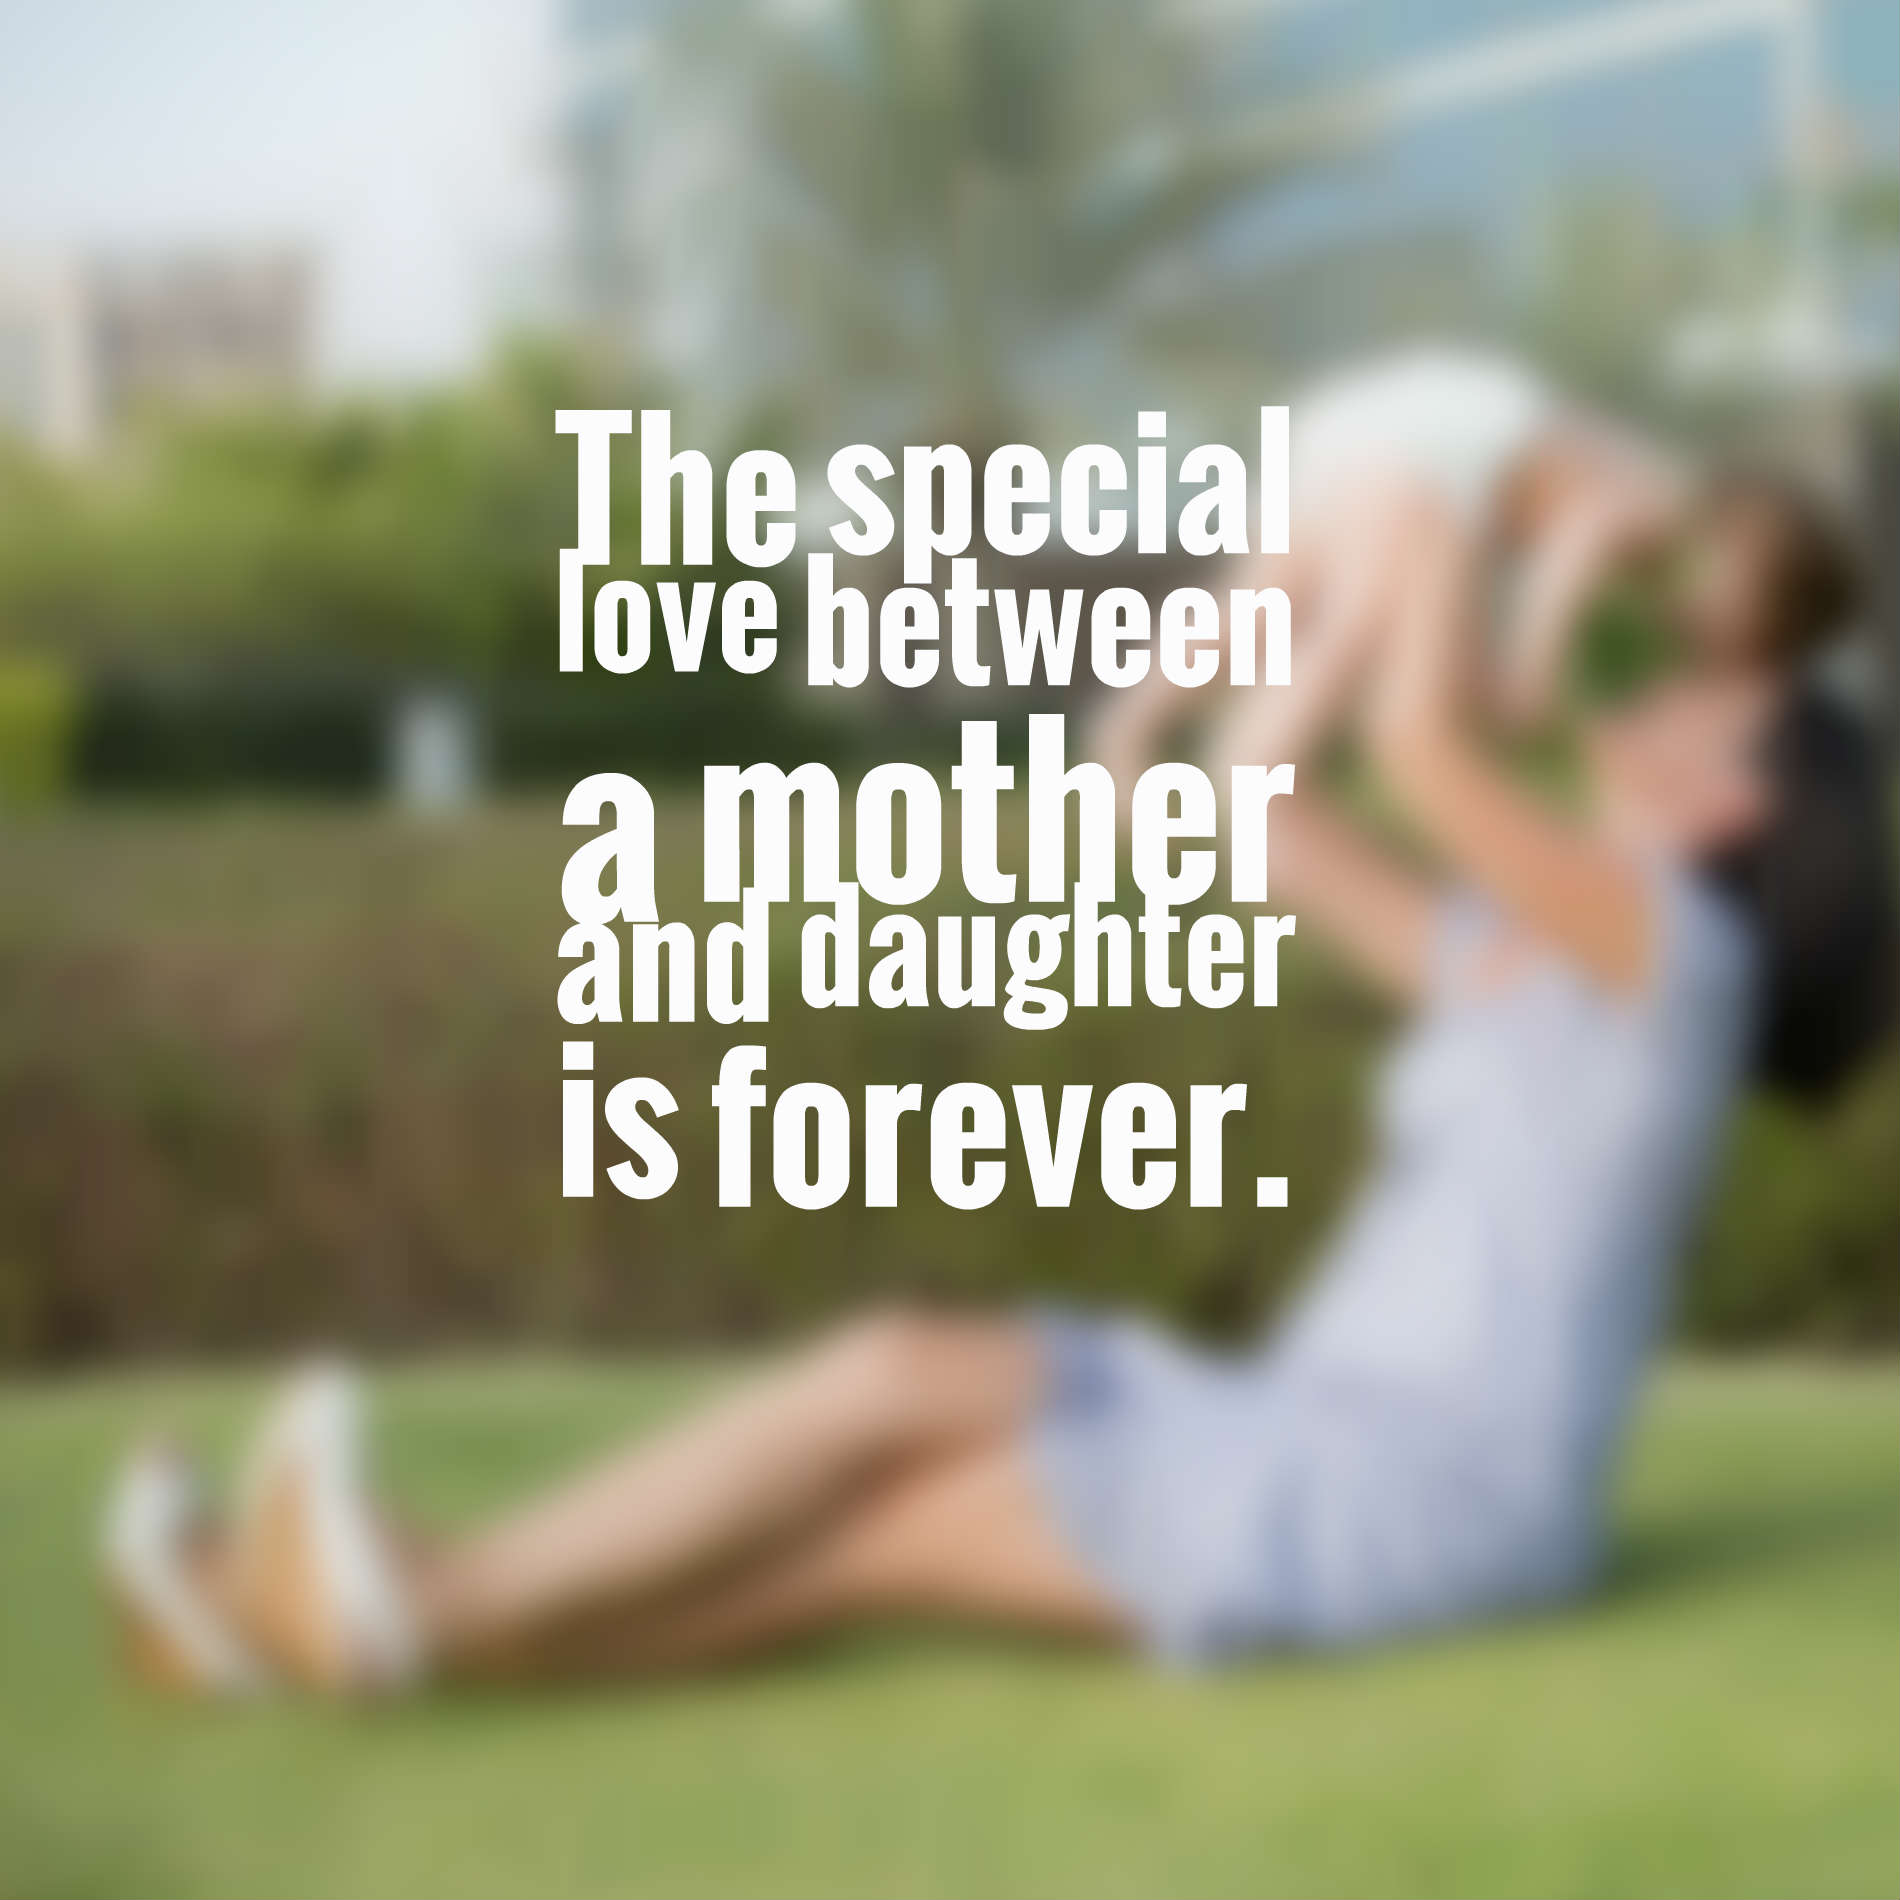 45 Inspirational Mother Daughter Quotes With Images